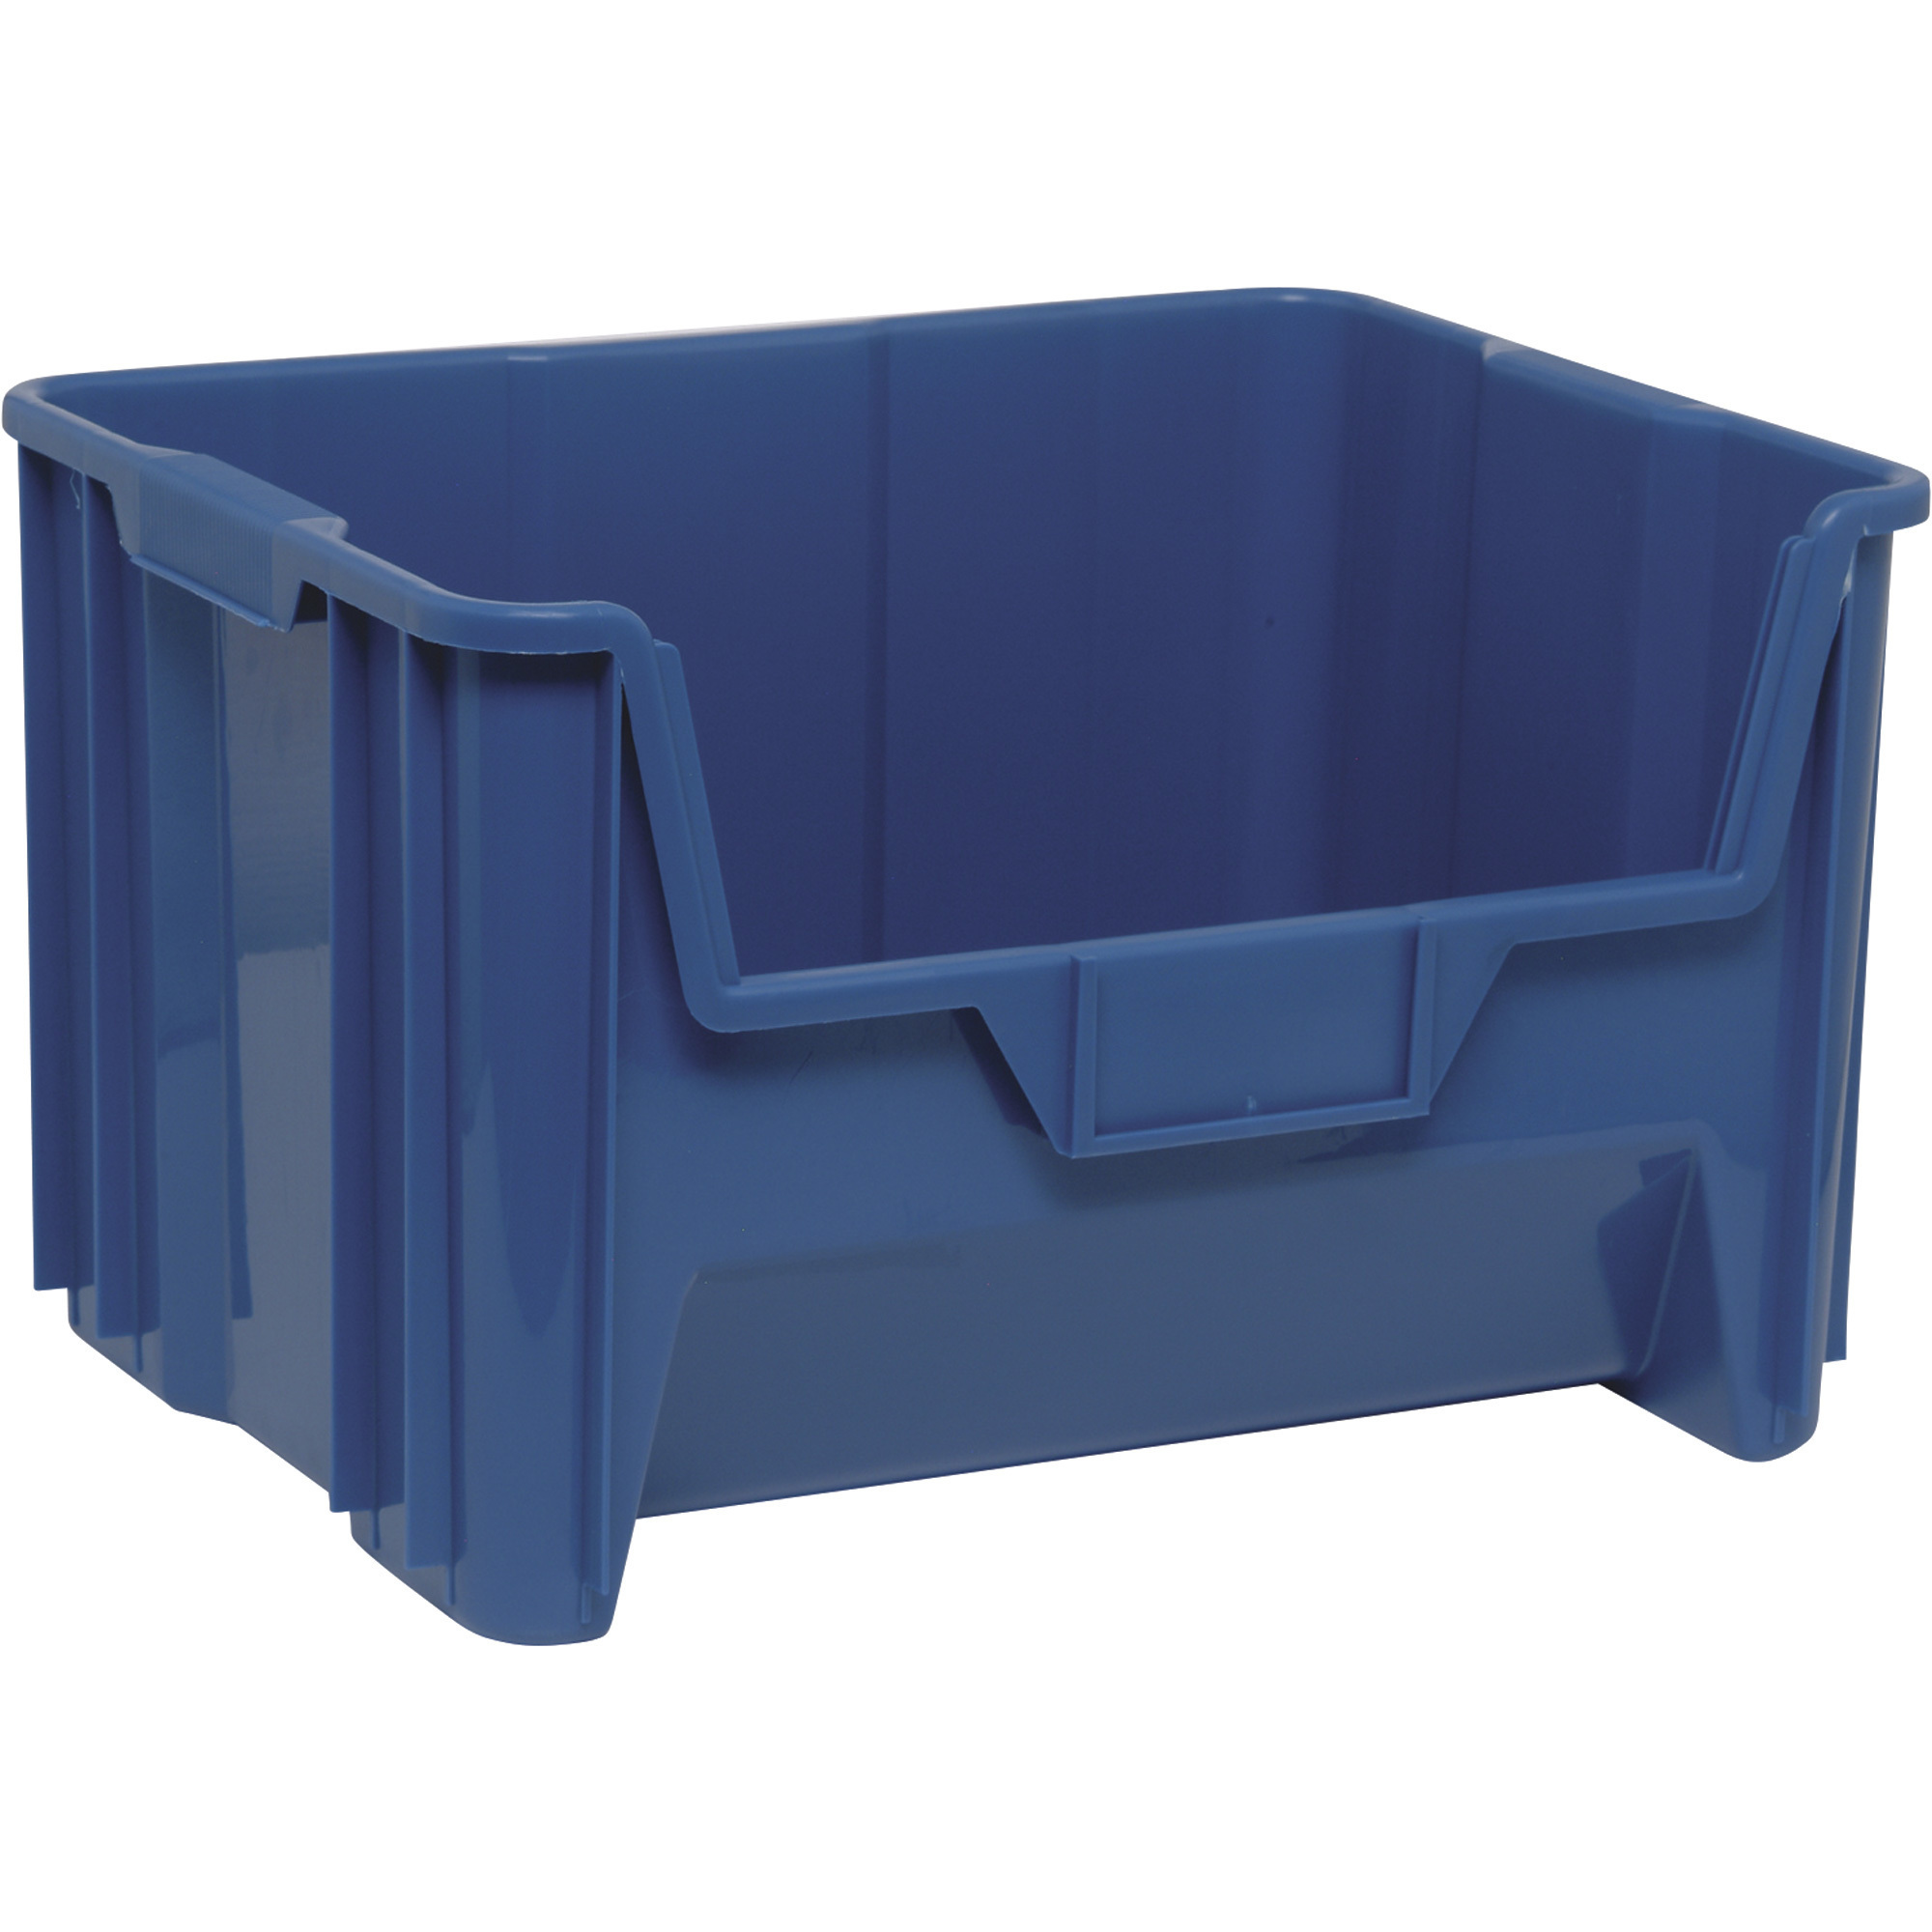 Quantum Storage Giant Stack Containers, 15 1/4Inch x 19 7/8Inch x 12 7/16Inch Size, Blue, Model QGH700BL